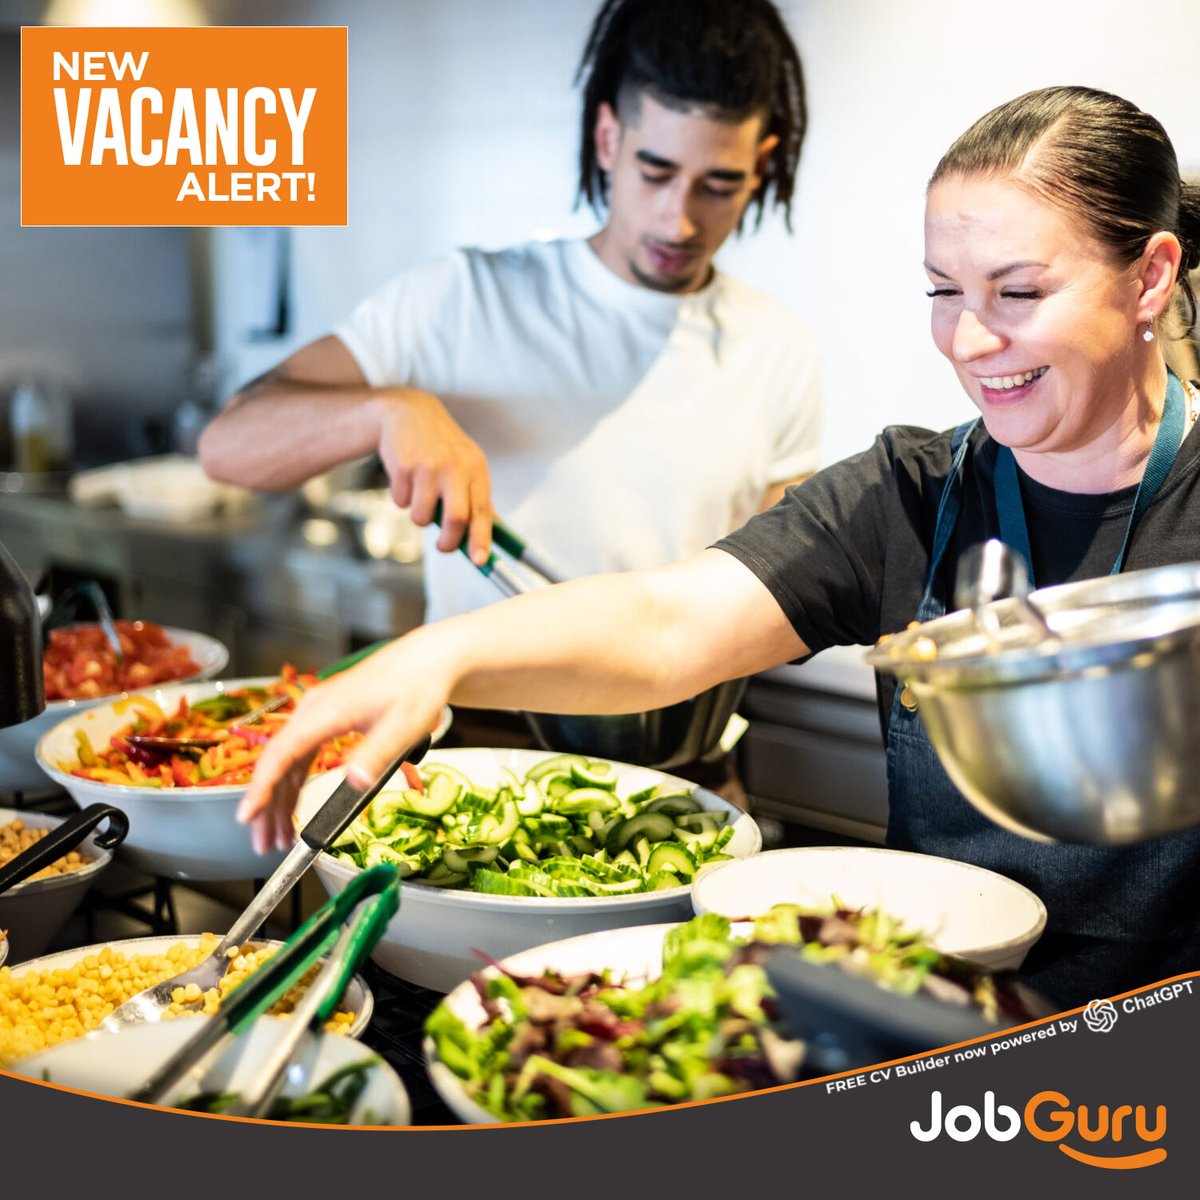 🍴✨ Ready to take the next step in your culinary career? Join us at BaxterStorey as a Sous Chef in Dublin. Competitive salary, amazing benefits, and endless opportunities for growth. Apply now! #SousChef #DublinJobs 🇮🇪👩‍🍳🚀jobguru.ie/vacancy/sous-c…